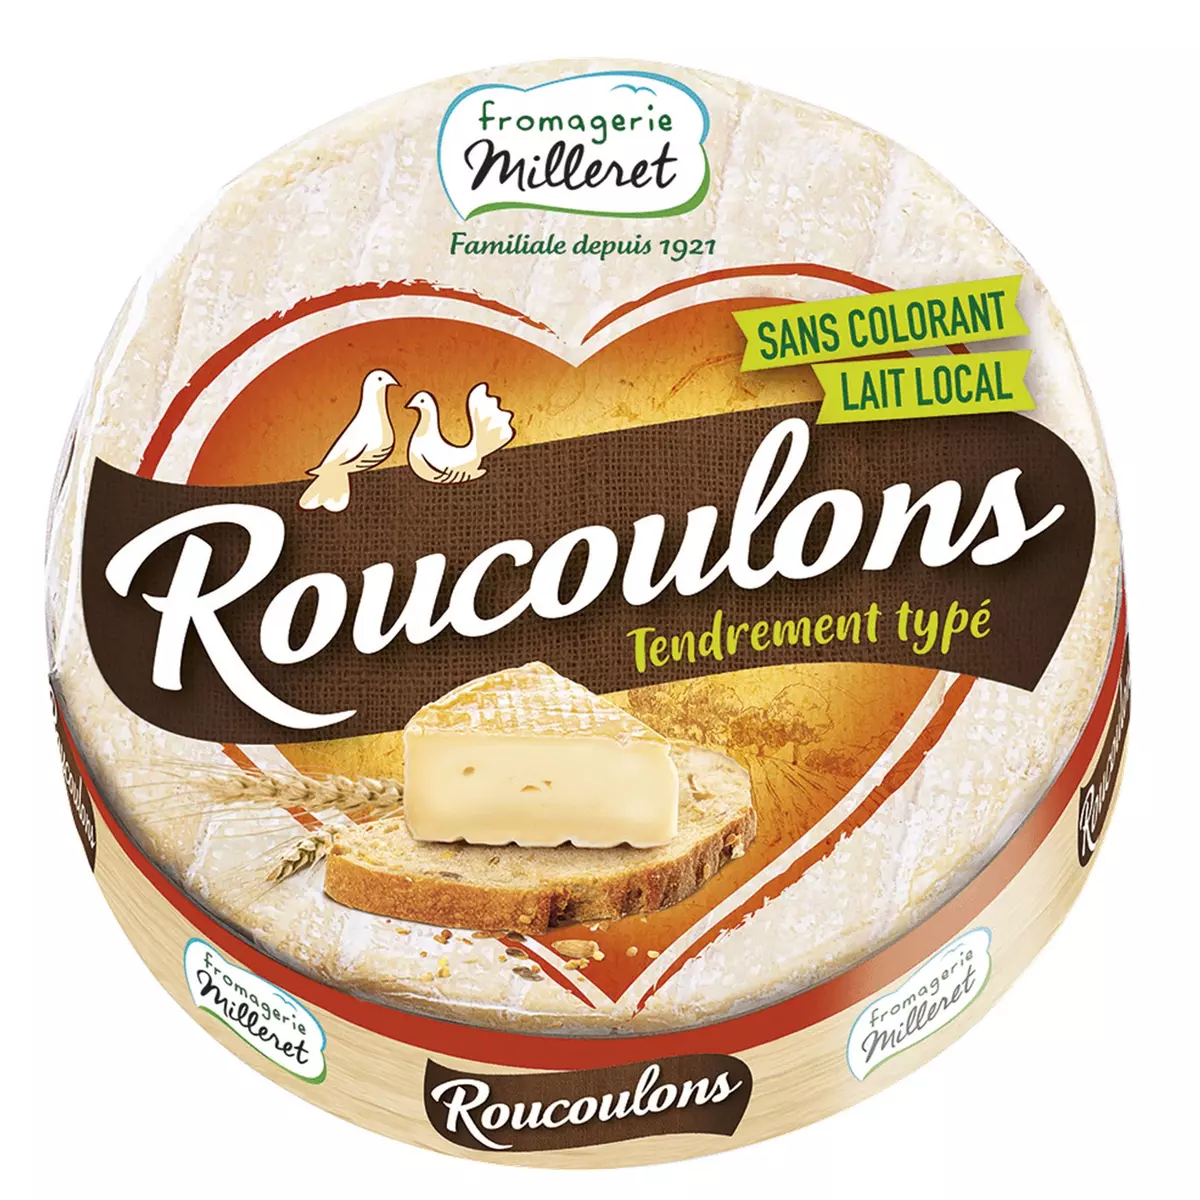 FROMAGERIE MILLERET Roucoulons 30%MG 220g